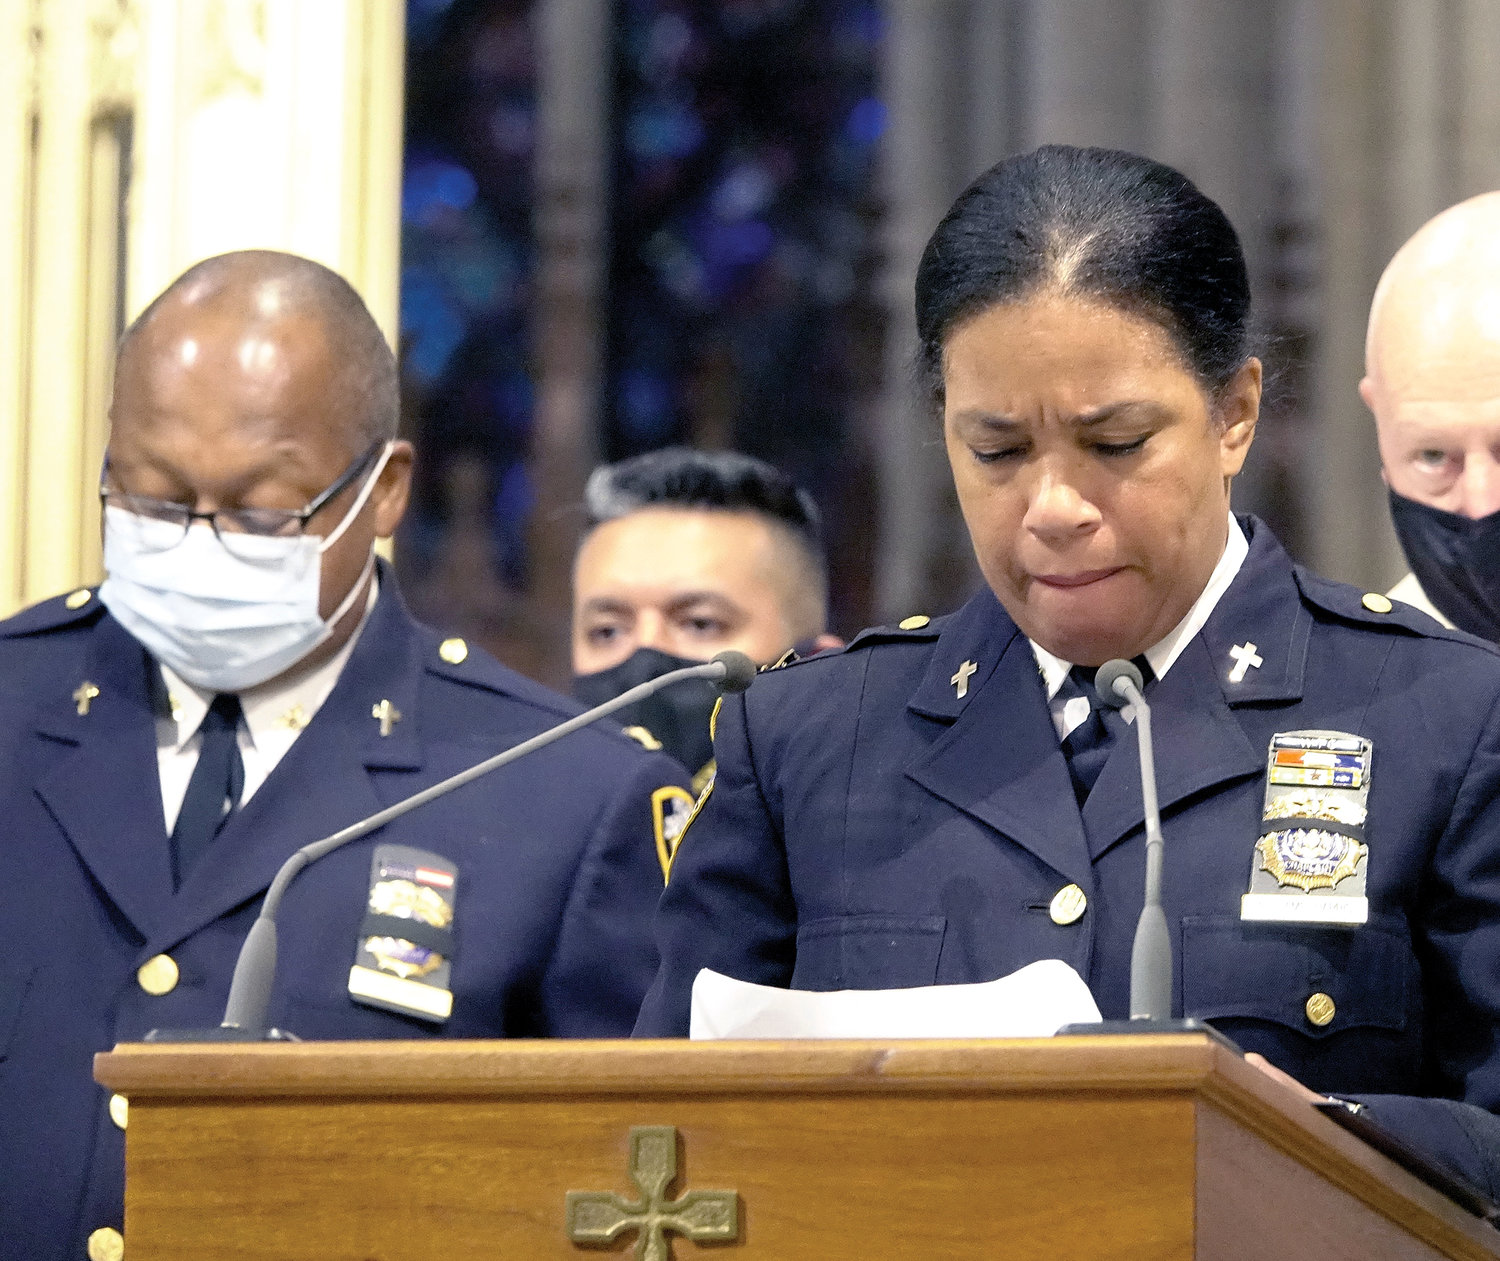 Several NYPD members led the Prayer of the Faithful, which included reading the names of the victims.